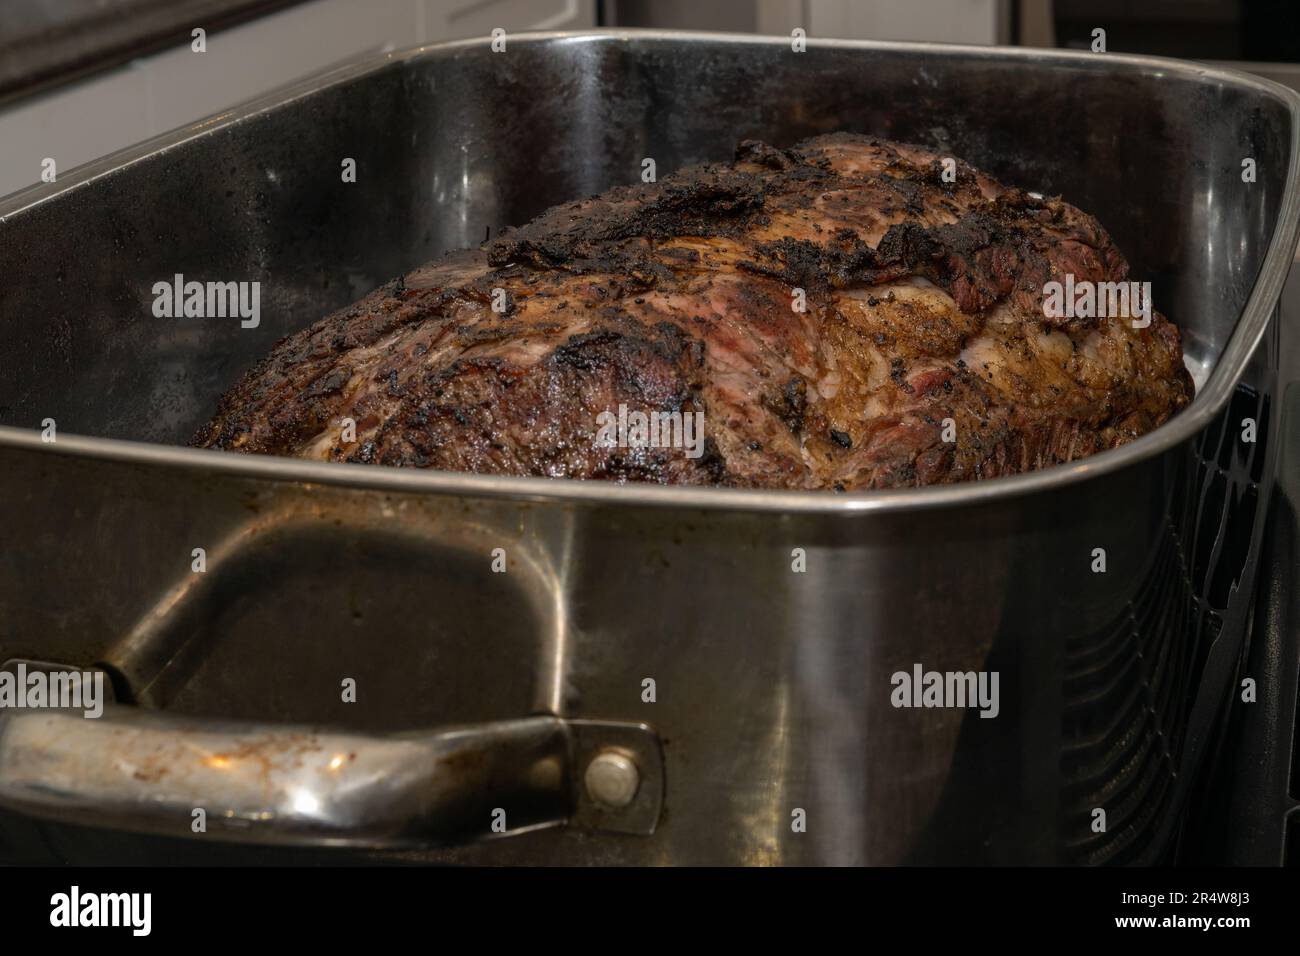 A large well-done Angus beef prime rib roast cooked in a roaster pan with onions and garlic. The shiny metal pan is rectangular in shape with handles. Stock Photo